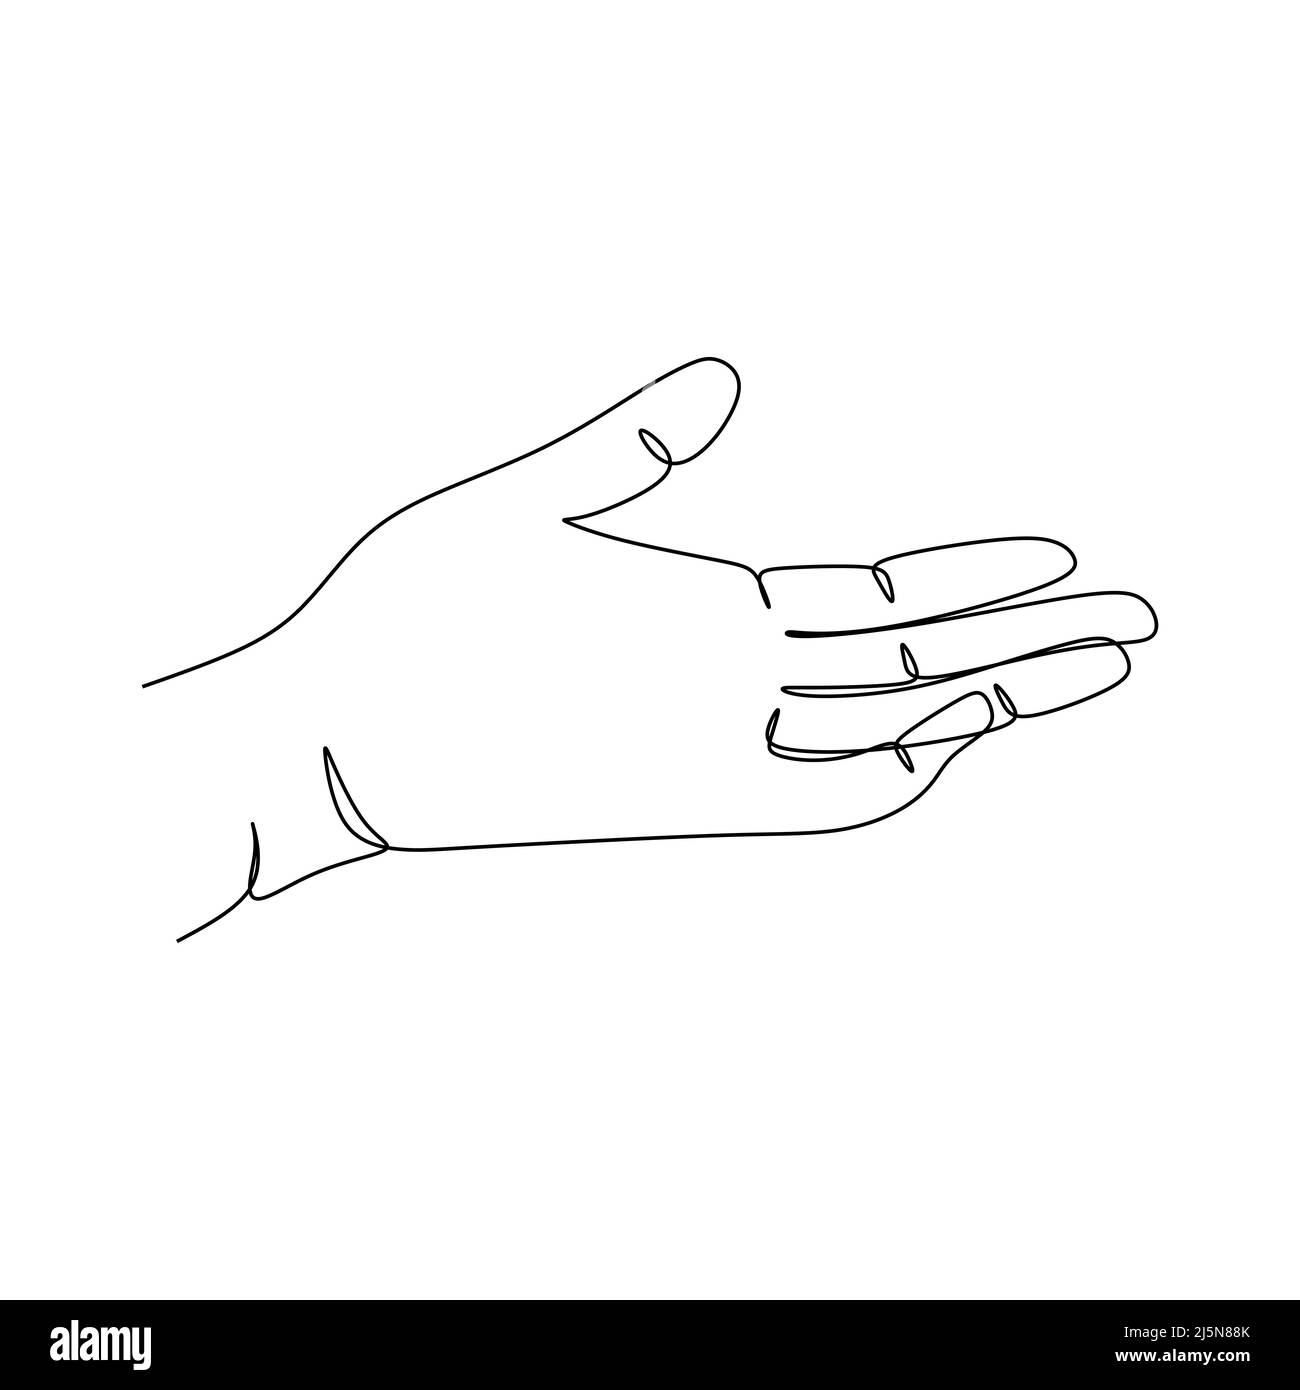 open palm continuous line draw design vector illustration. Sign and symbol of hand gestures. Single continuous drawing line. Hand drawn style art dood Stock Vector